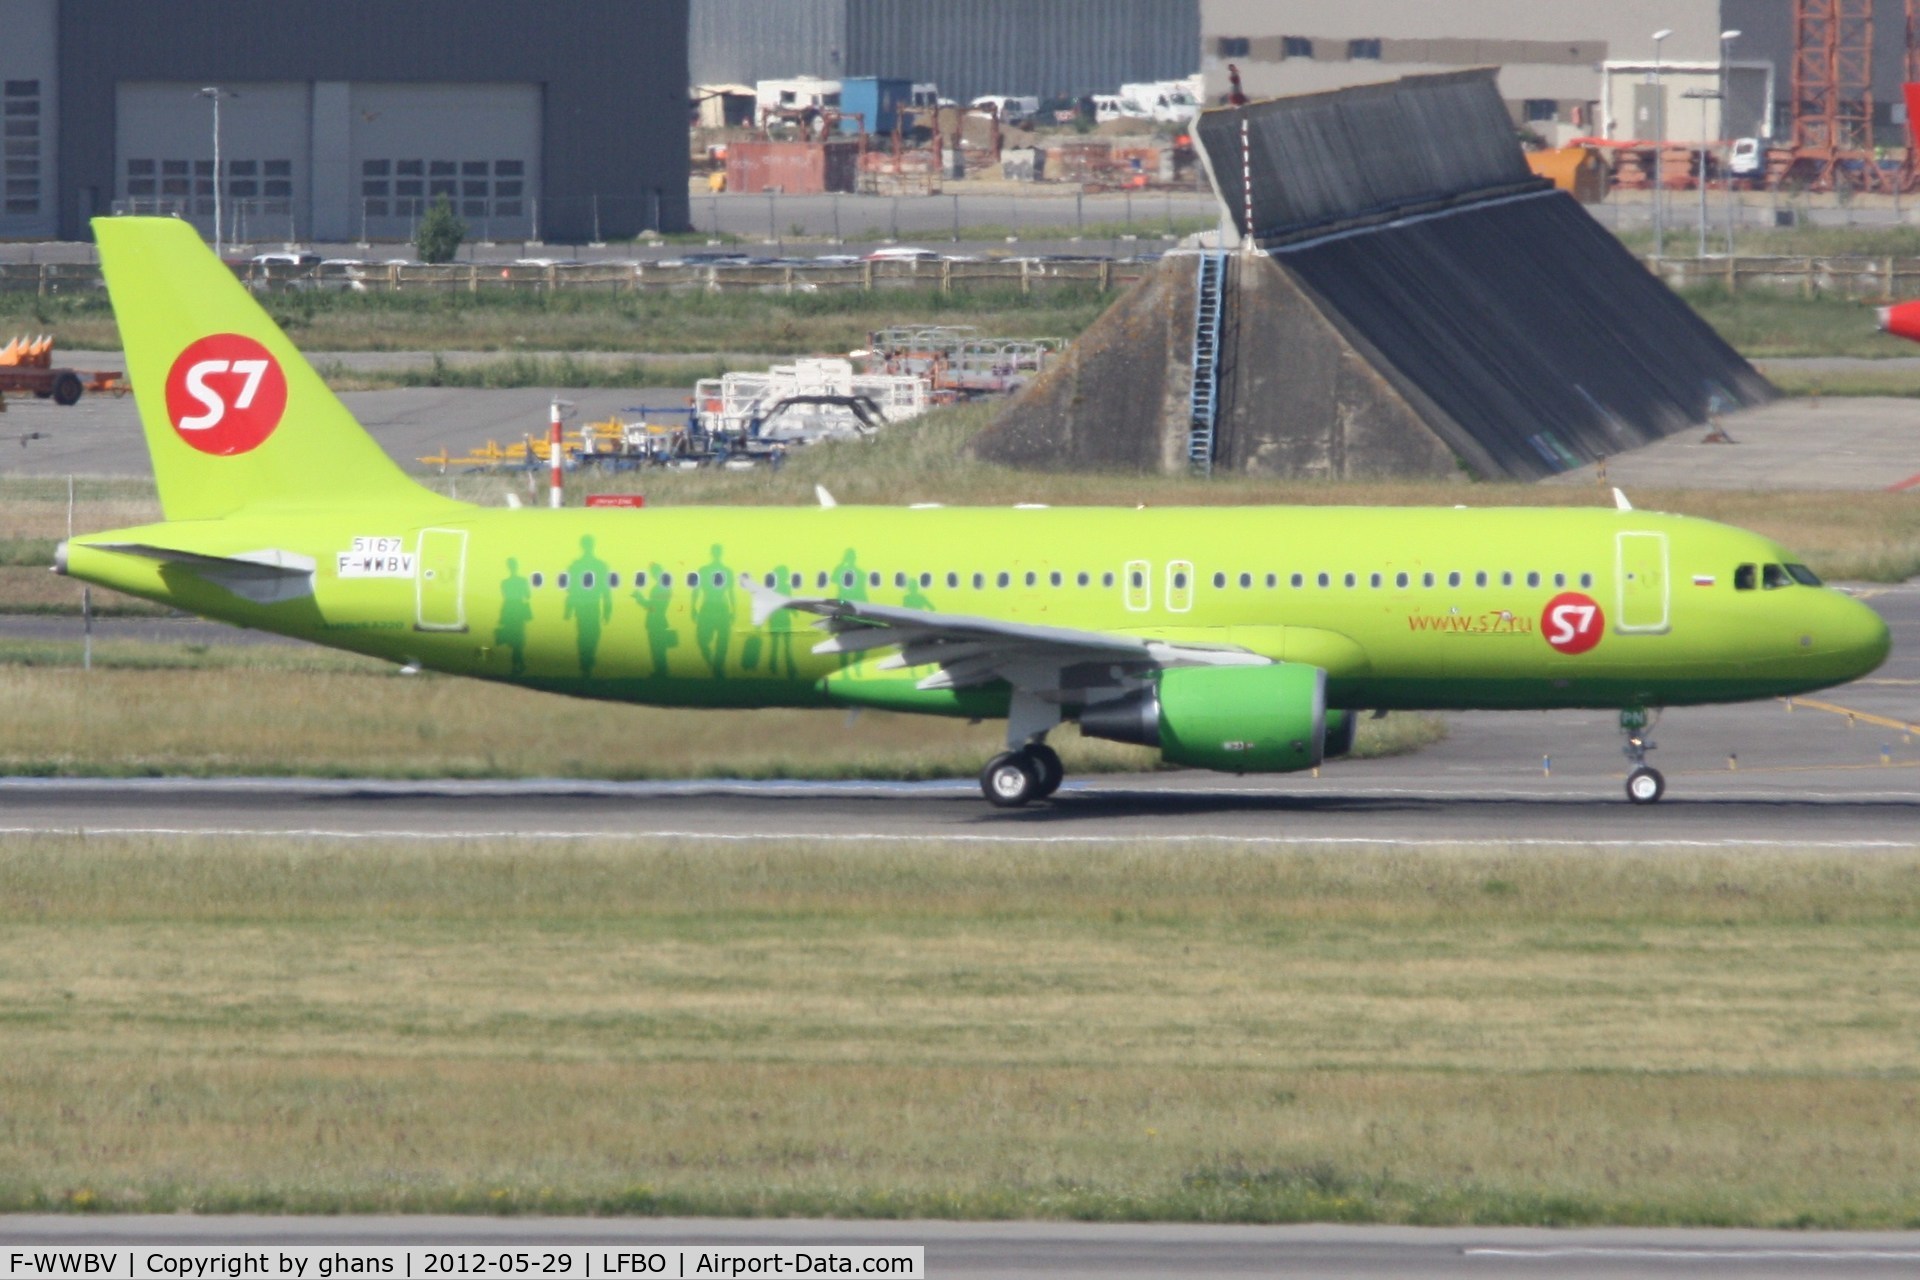 F-WWBV, 2012 Airbus A320-214 C/N 5167, to become VQ-BPN